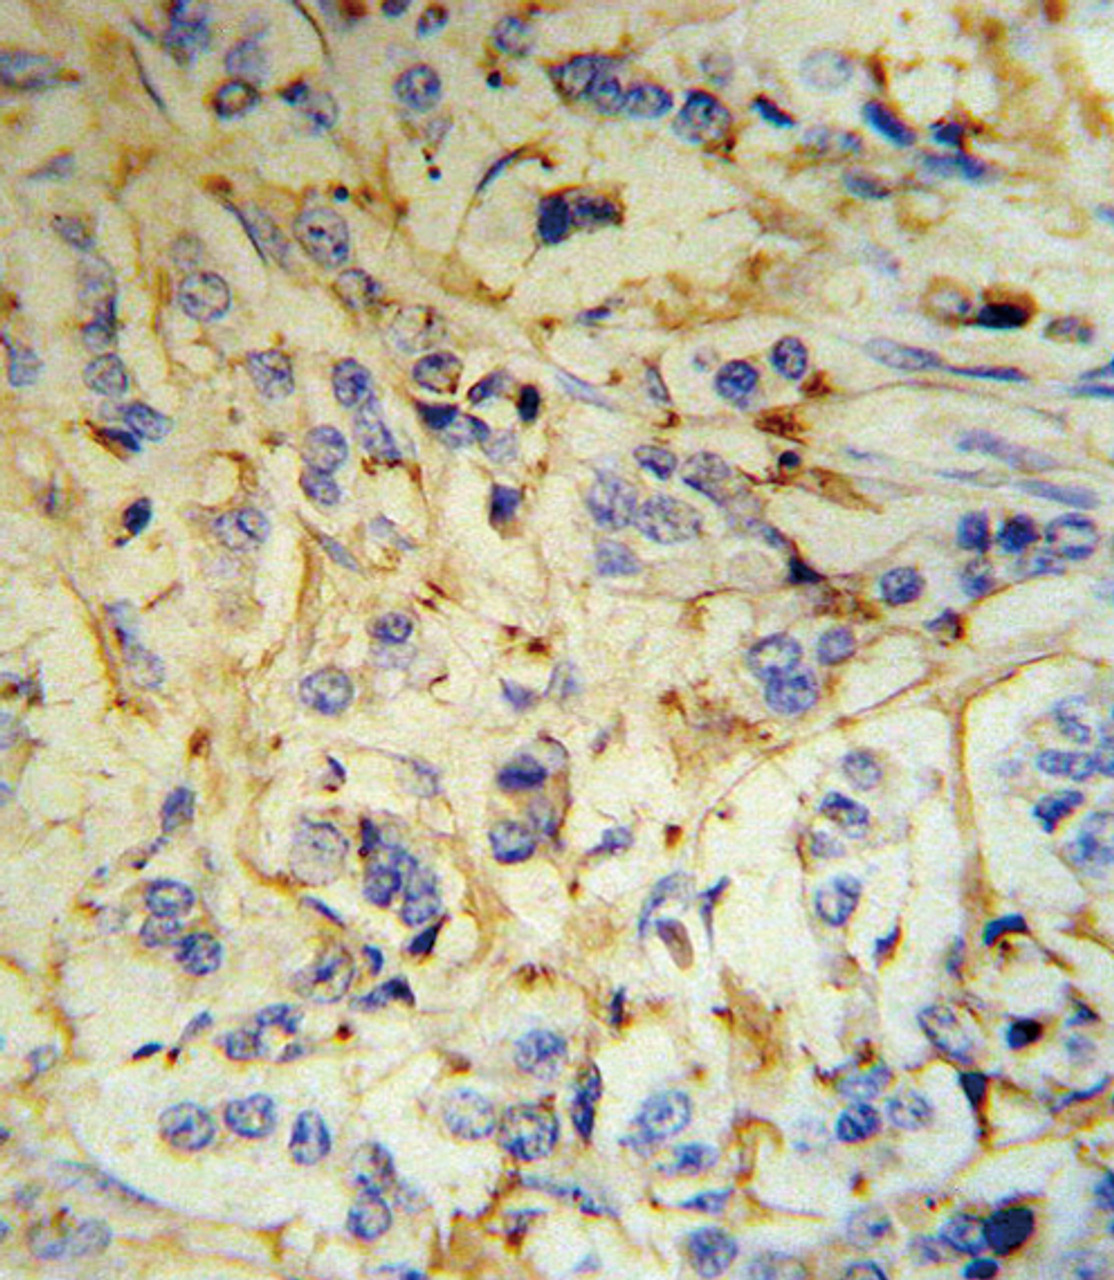 FGA Antibody (RB18707) IHC analysis in formalin fixed and paraffin embedded human breast carcinoma tissue followed by peroxidase conjugation of the secondary antibody and DAB staining.